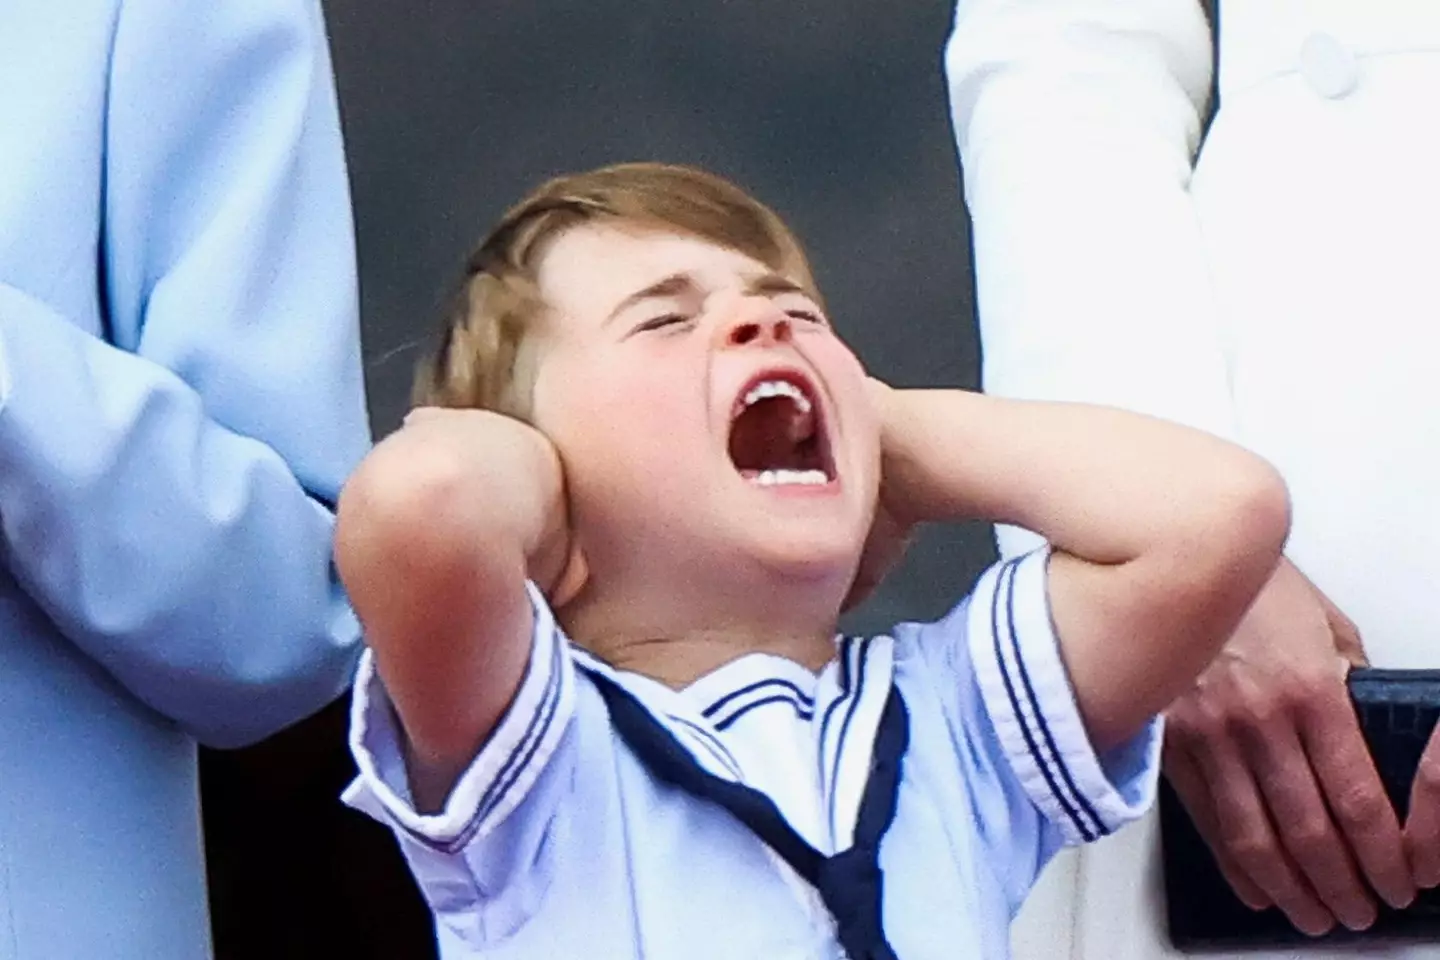 People are convinced that Prince Louis was wreaking havoc while his family was out on Monday.